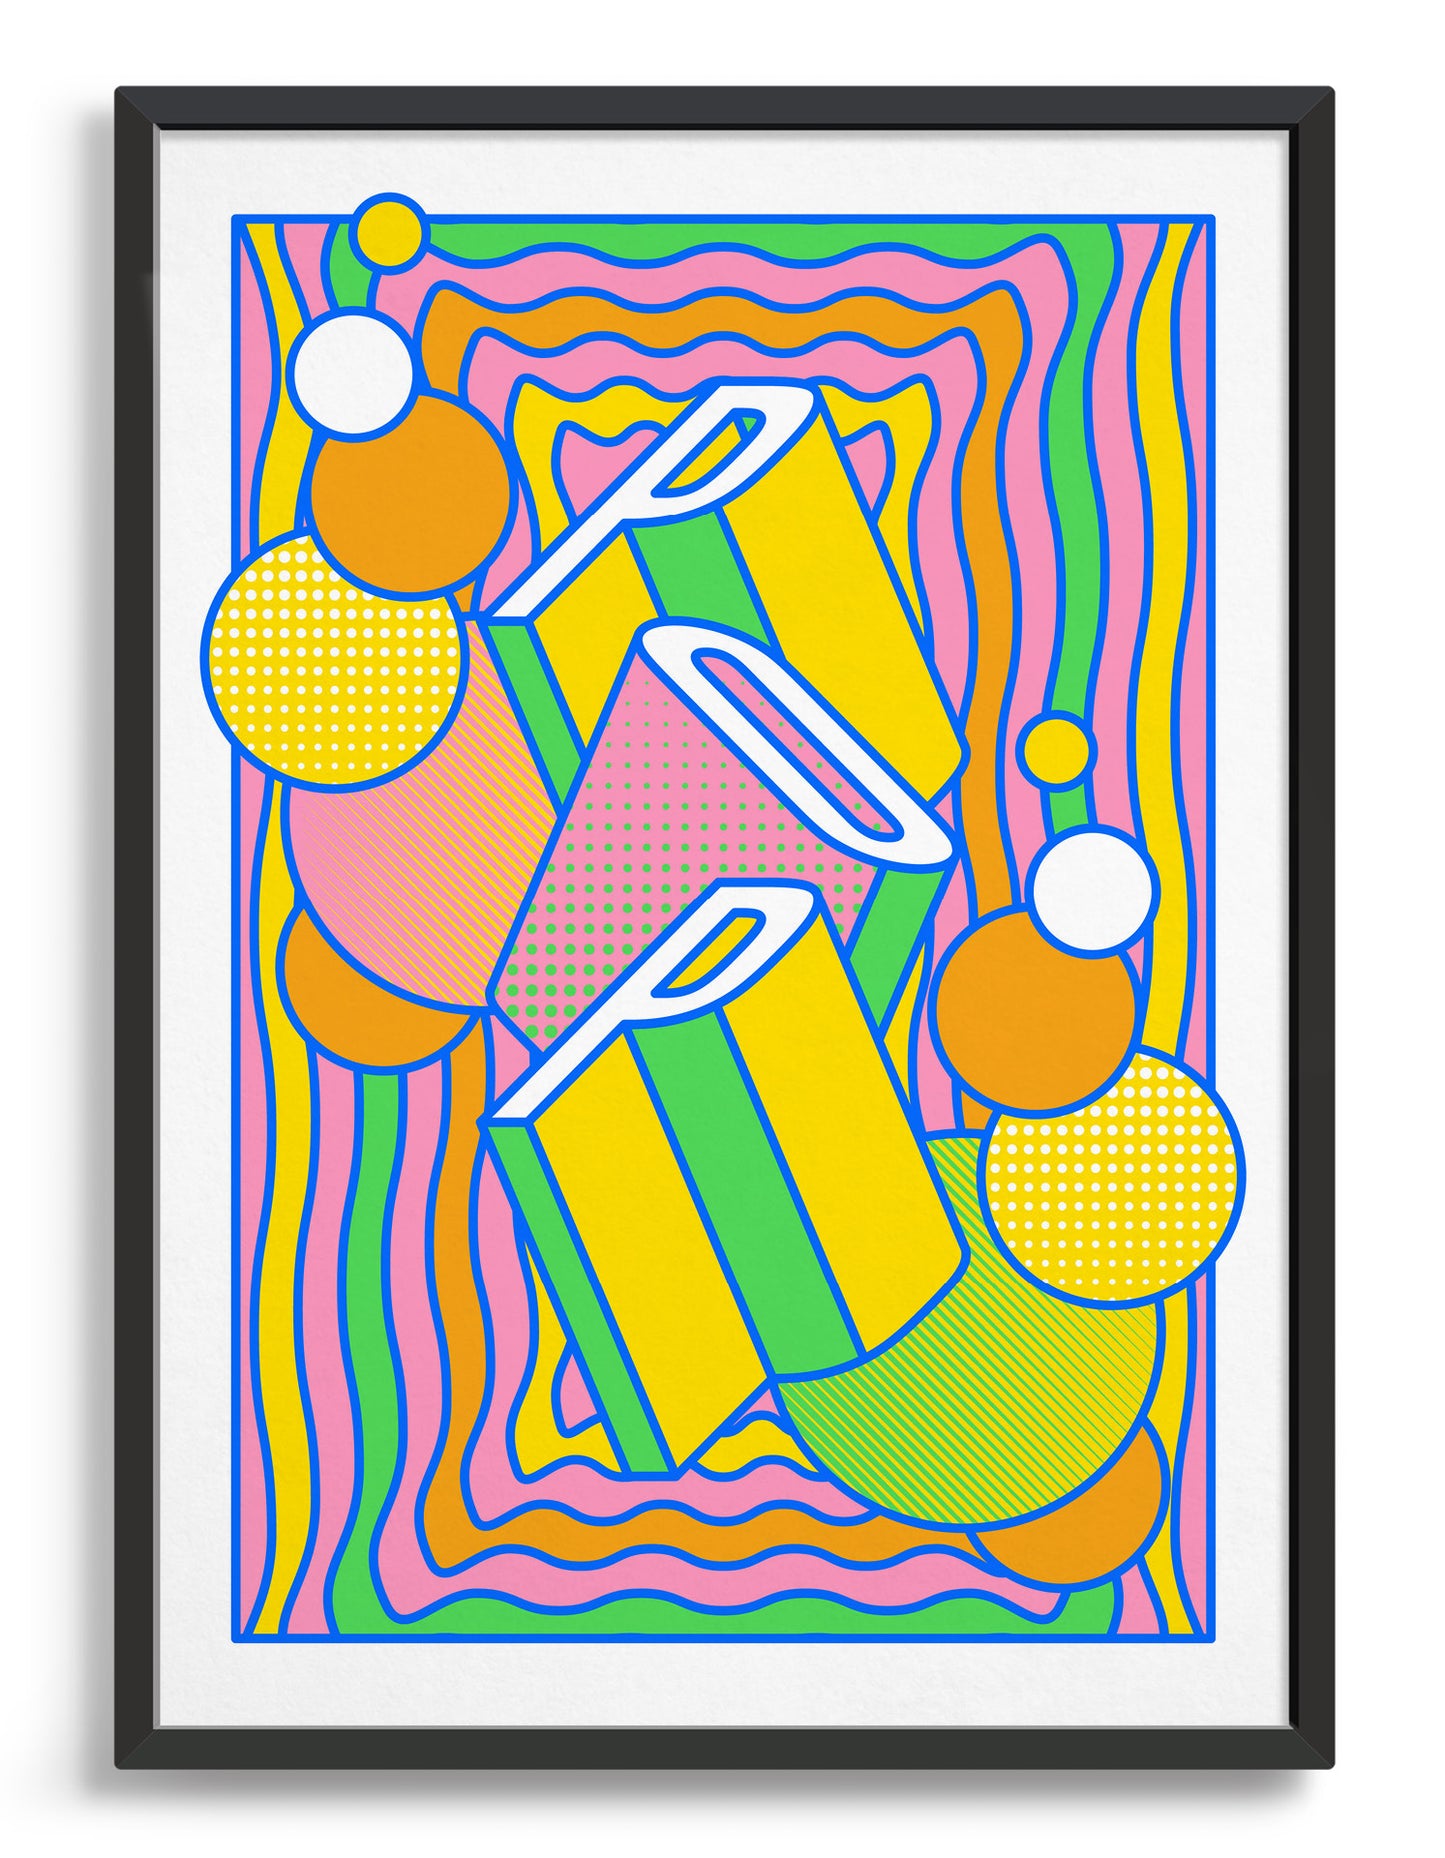 pop music art print featuring a geometric abstract pattern in bold shapes and vibrant rainbow colours. Block typography depicts the word Pop in tumbling text